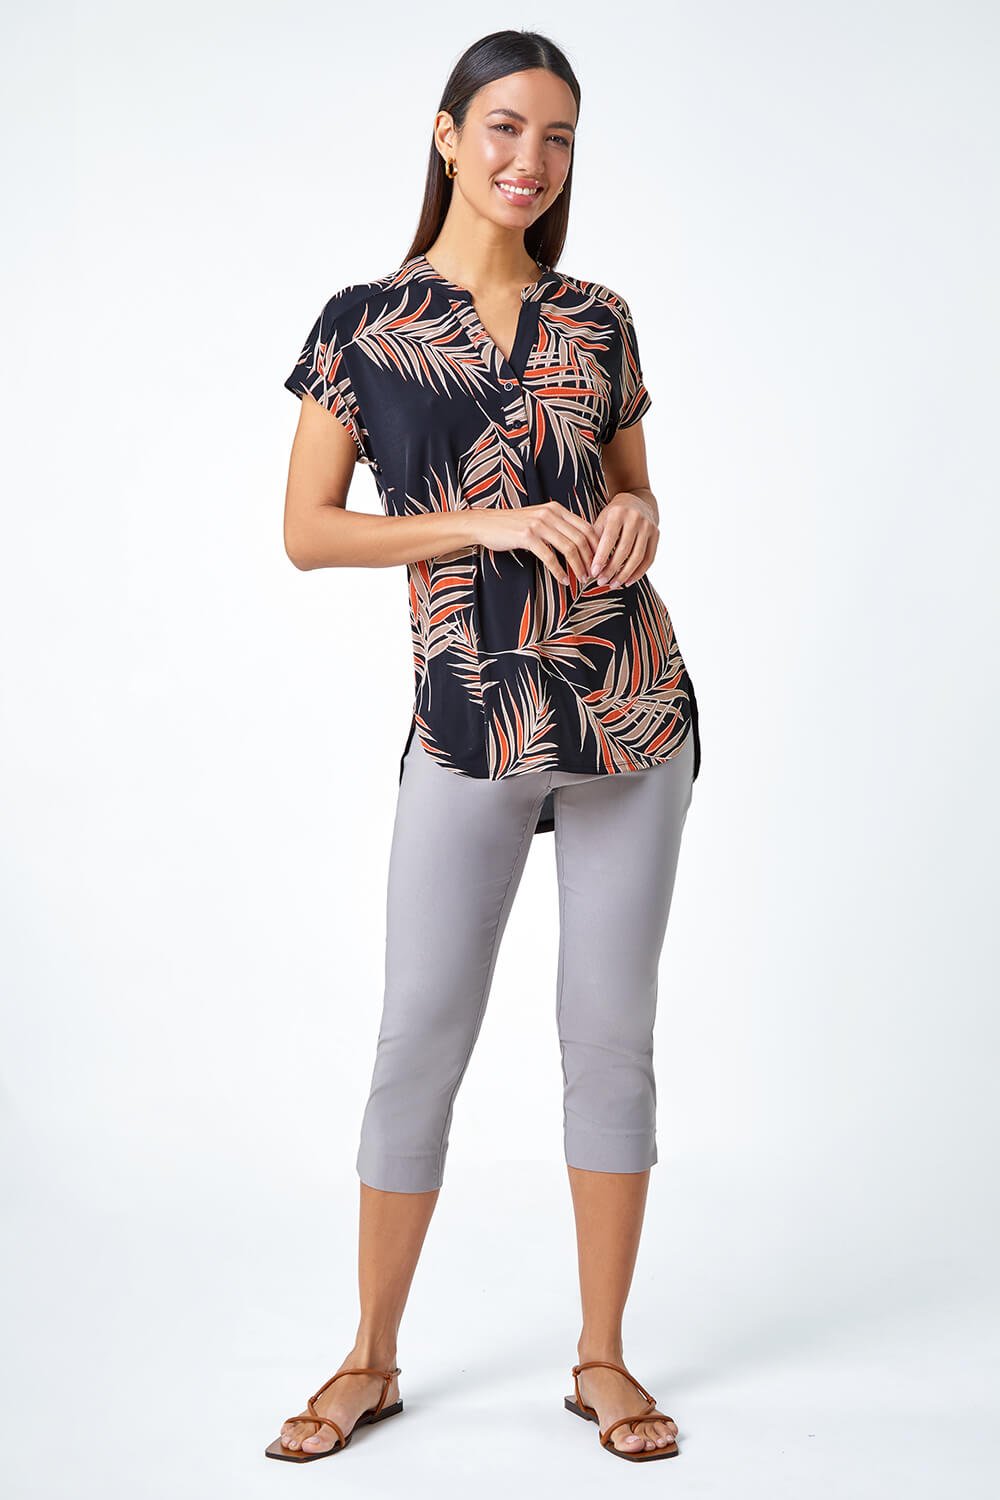 Rust Textured Tropical Print Overshirt Stretch Top, Image 2 of 5